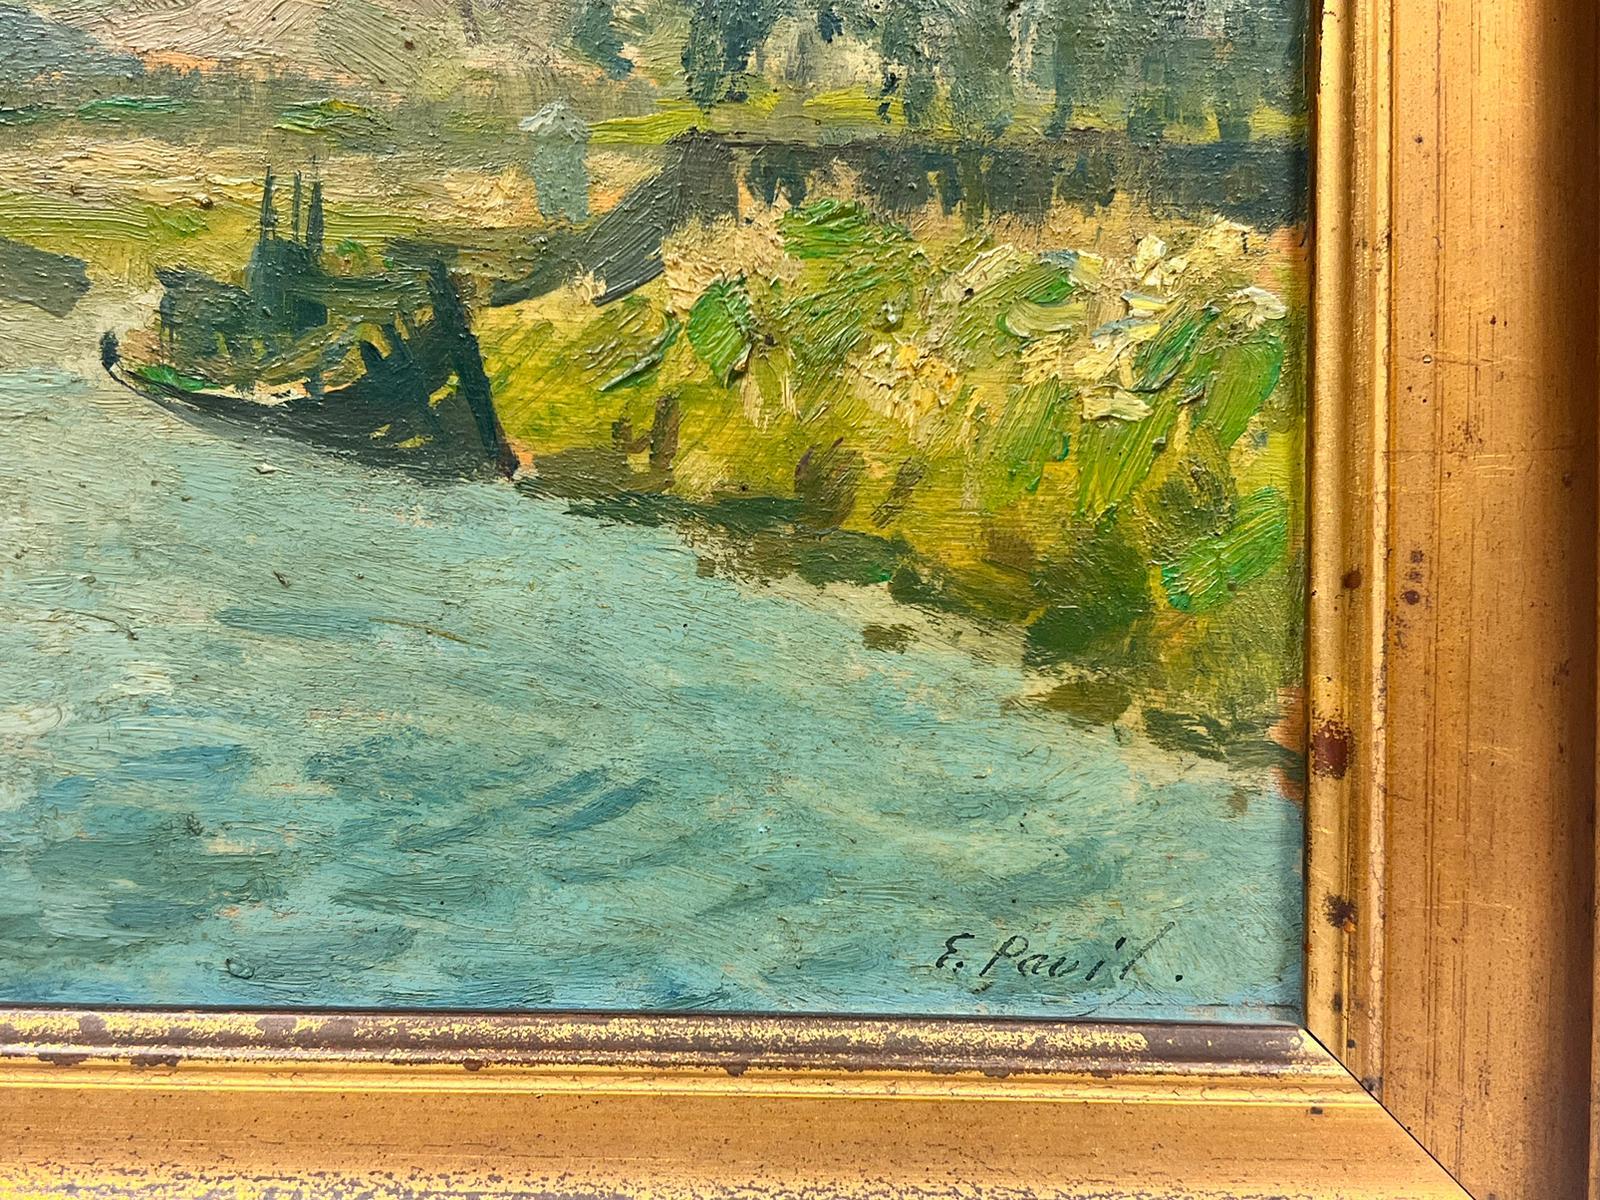 Ellie Anatole Pavil (Ukraine 1873-1911)
signed oil painting on board, framed
framed: 8.25 x 10.5
board : 7 x 9 inches
provenance: private collection, France 
condition: overall very good, might benefit from a light clean